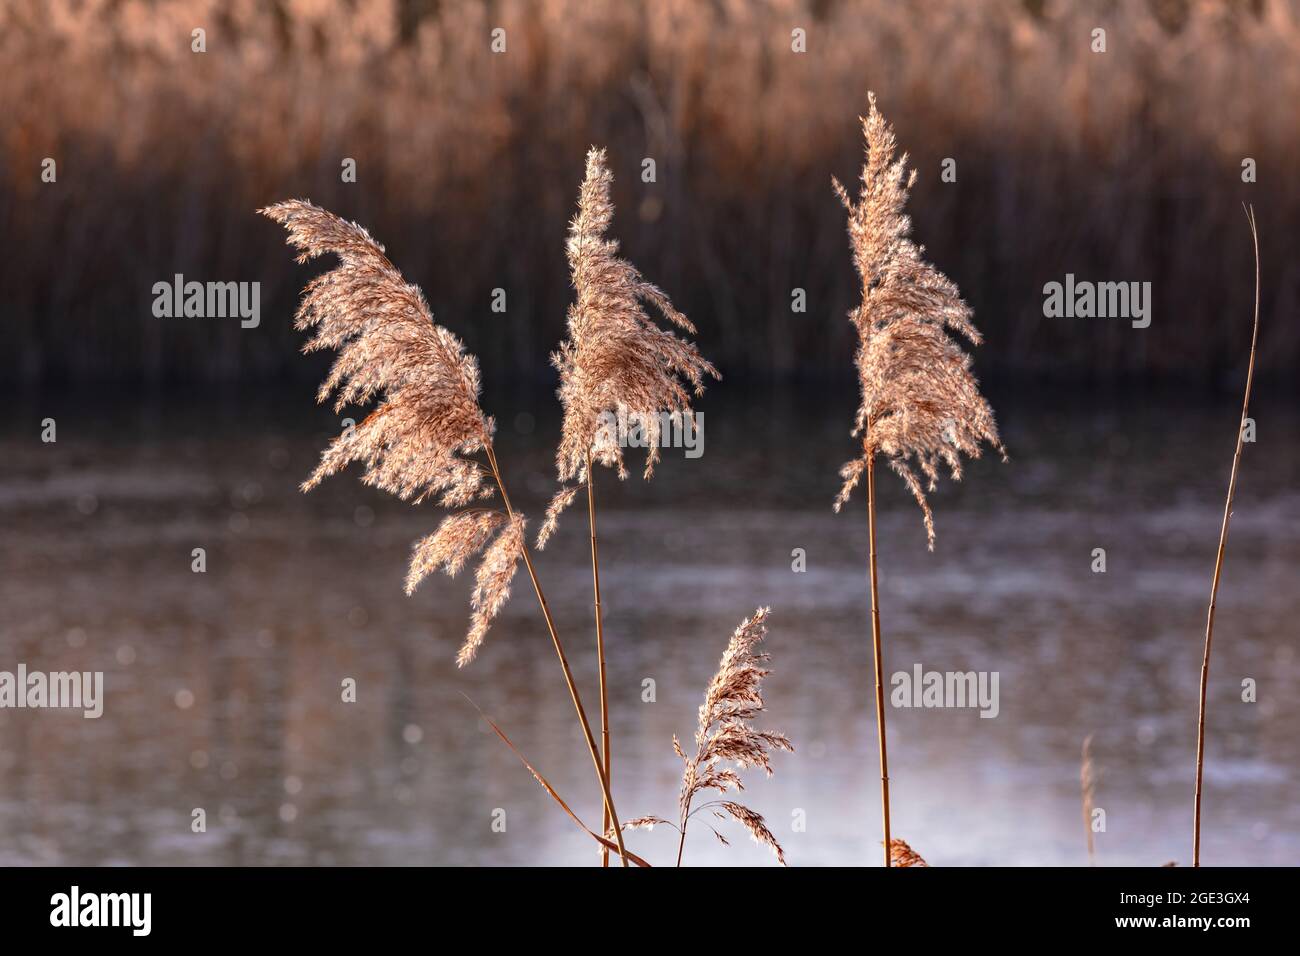 Romantic reeds at the pond exposed in the back light Stock Photo